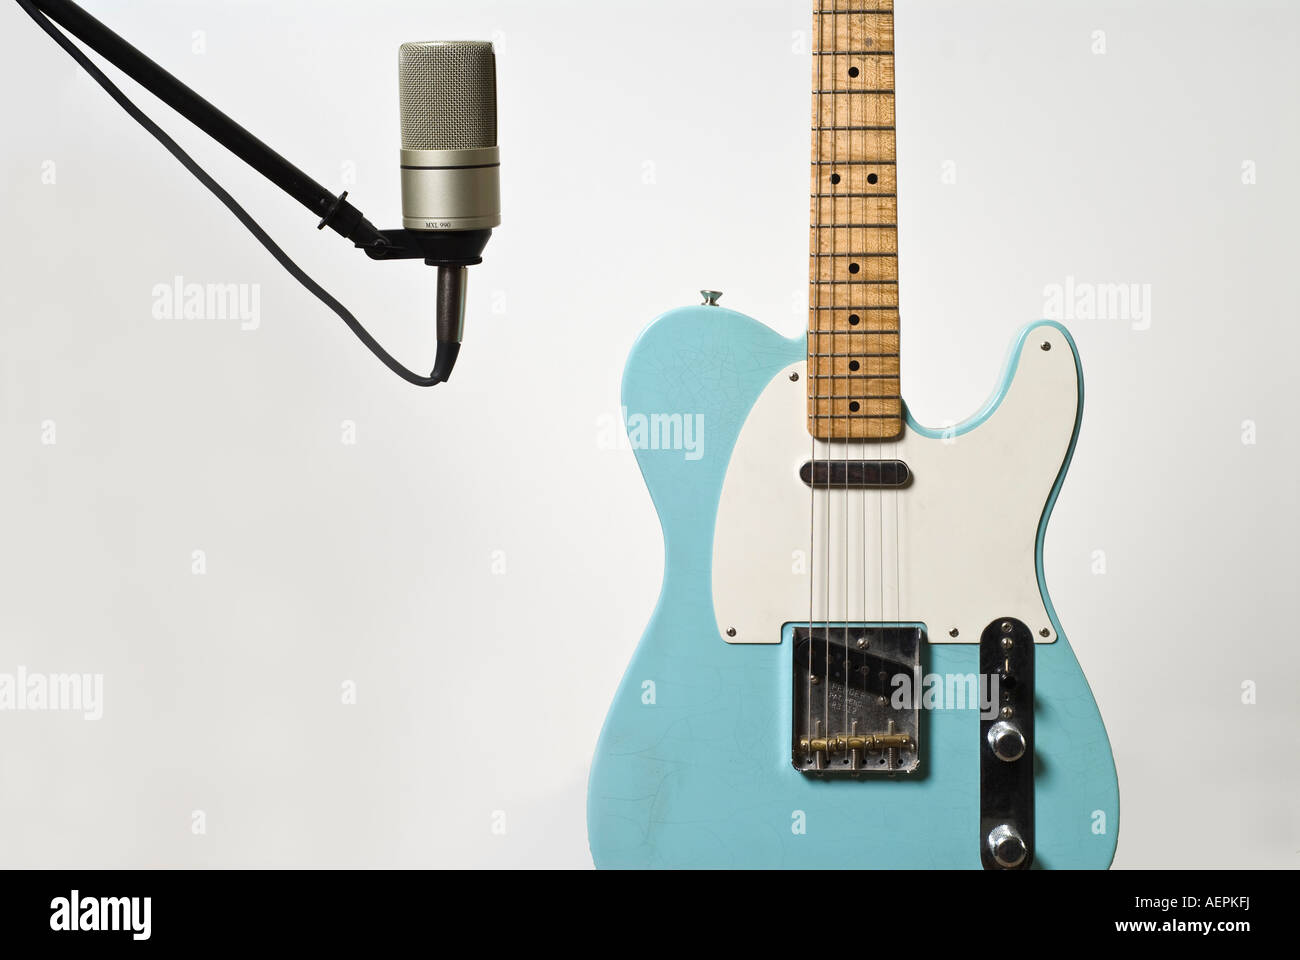 Fender Telecaster electric guitar and microphone Stock Photo